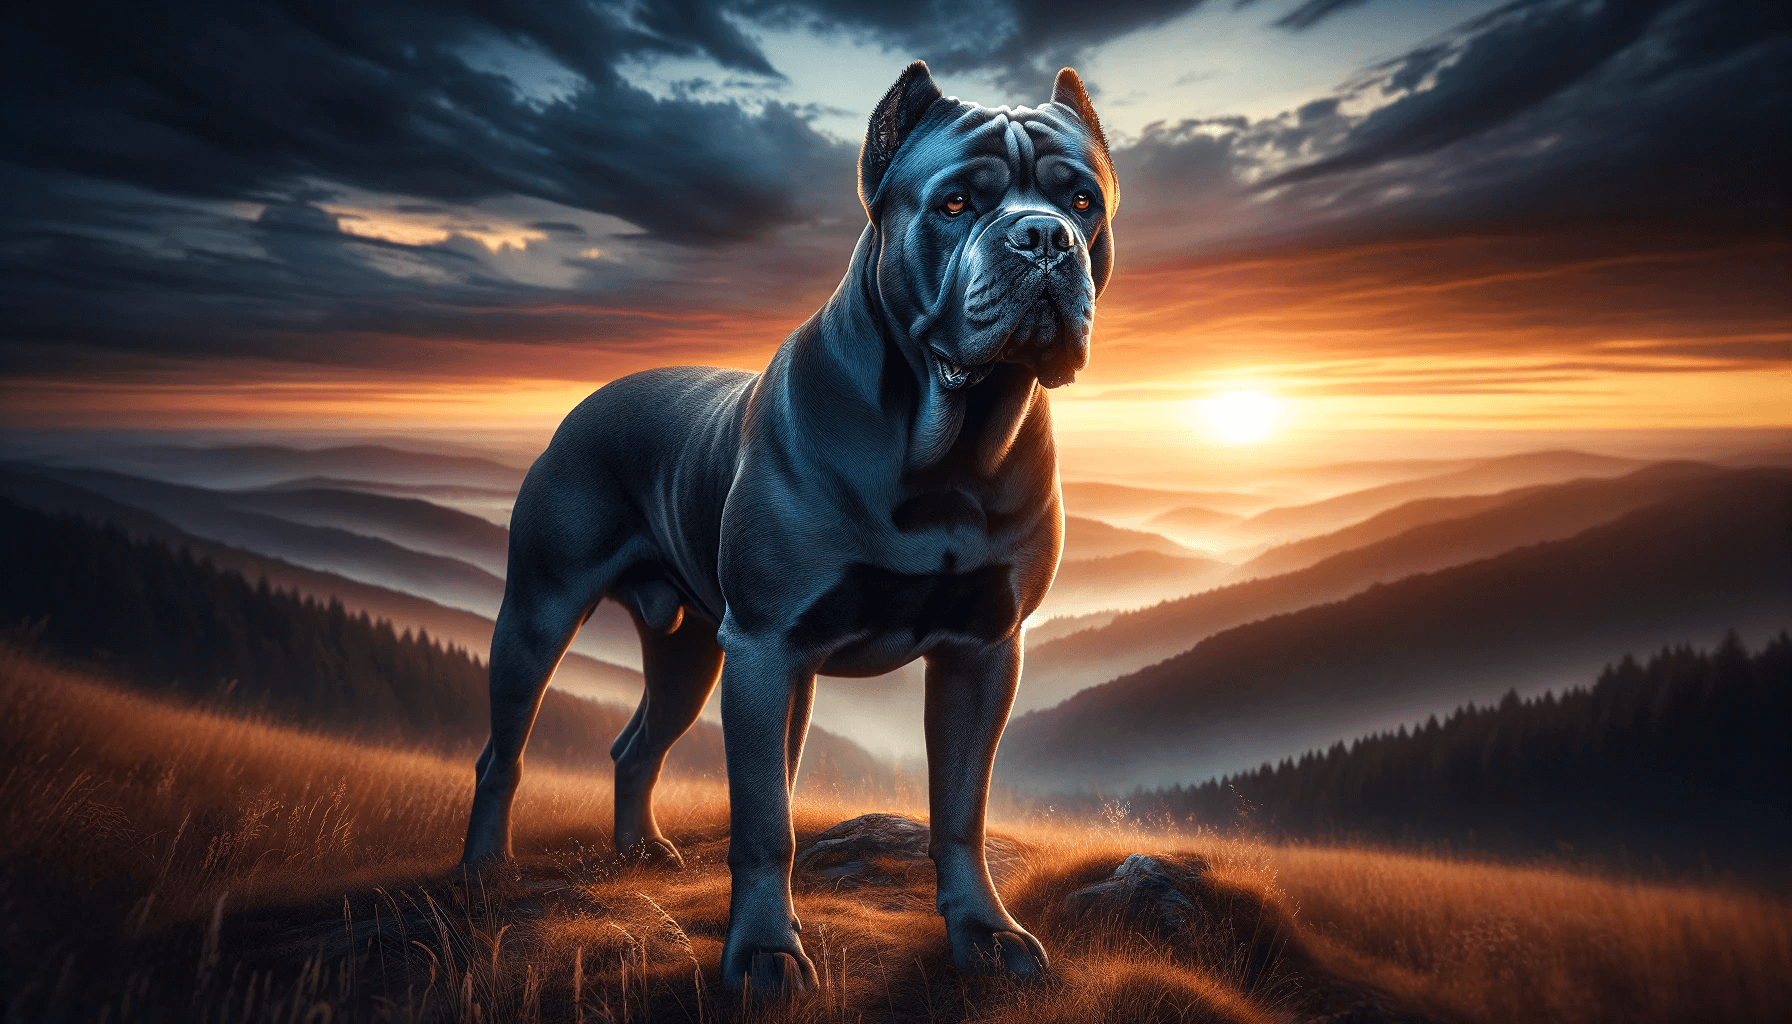 Blue Cane Corso Standing on a Hilltop with a Sunset in the Background